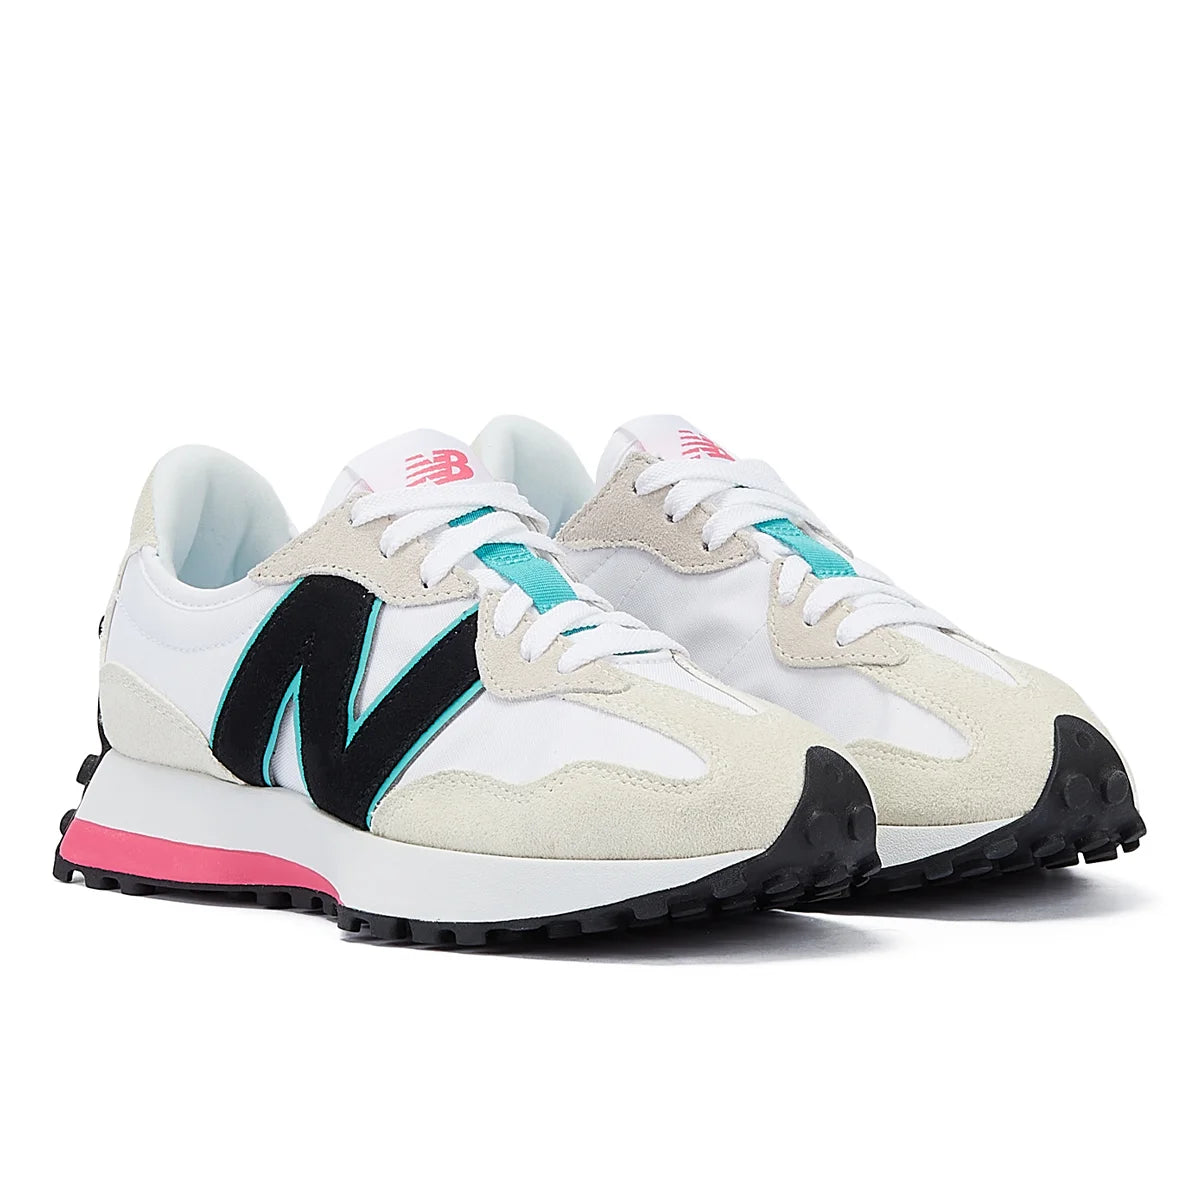 New Balance 327 Women’s Pink/Teal Trainers